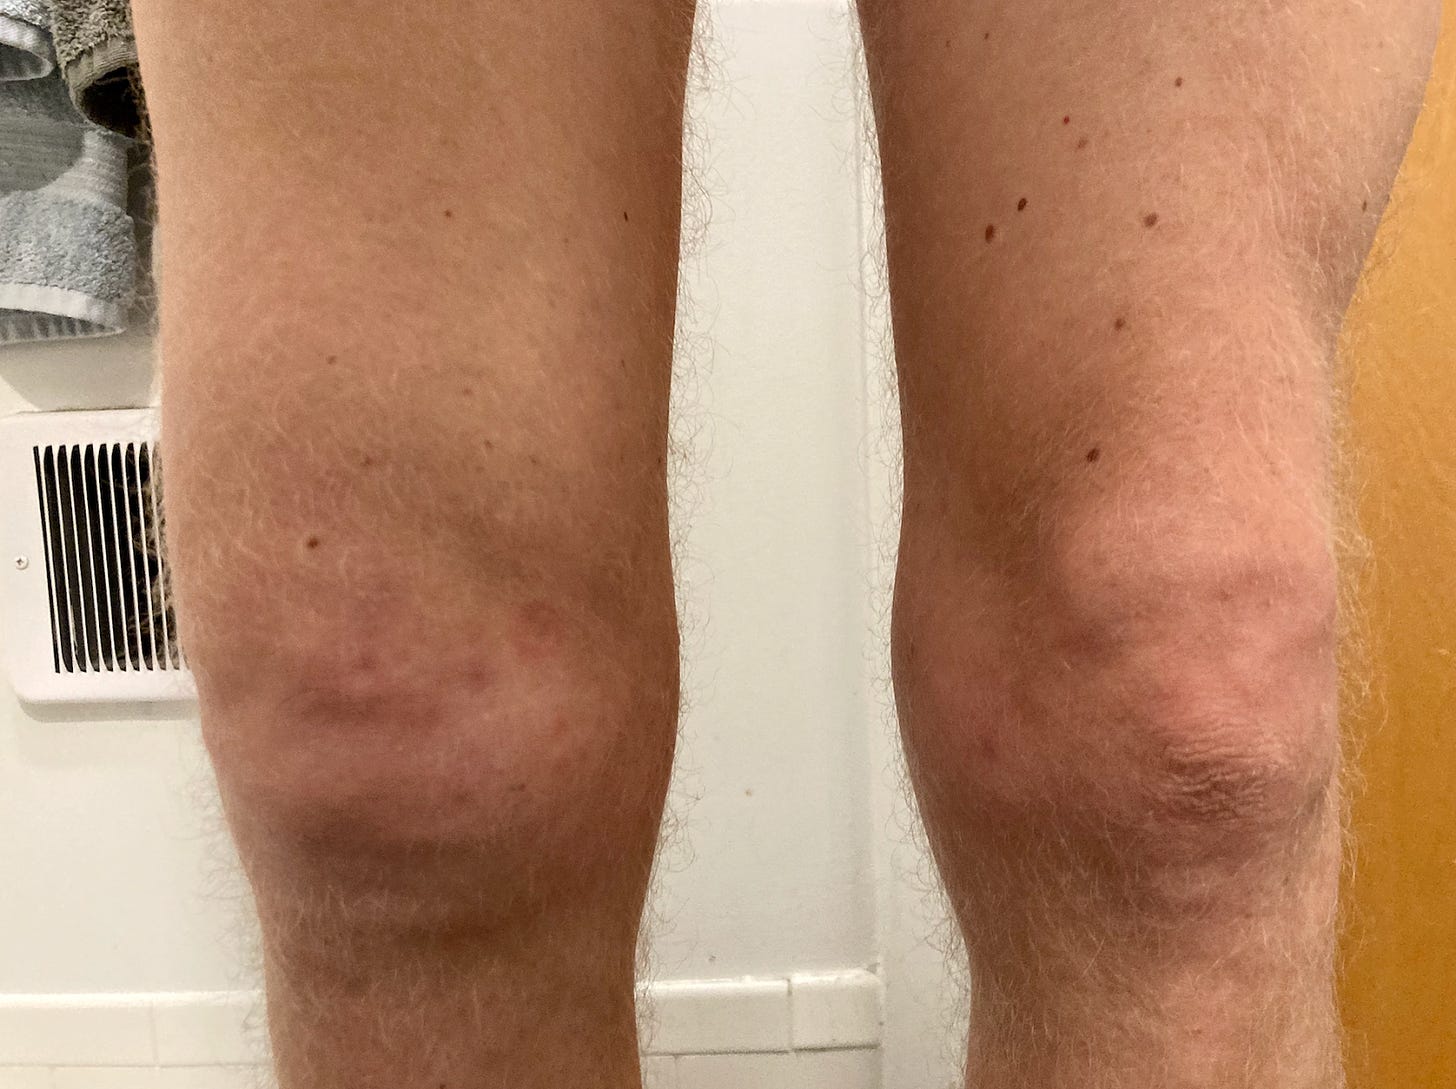 My knees, one of them is normal the other is the size of a small melon...